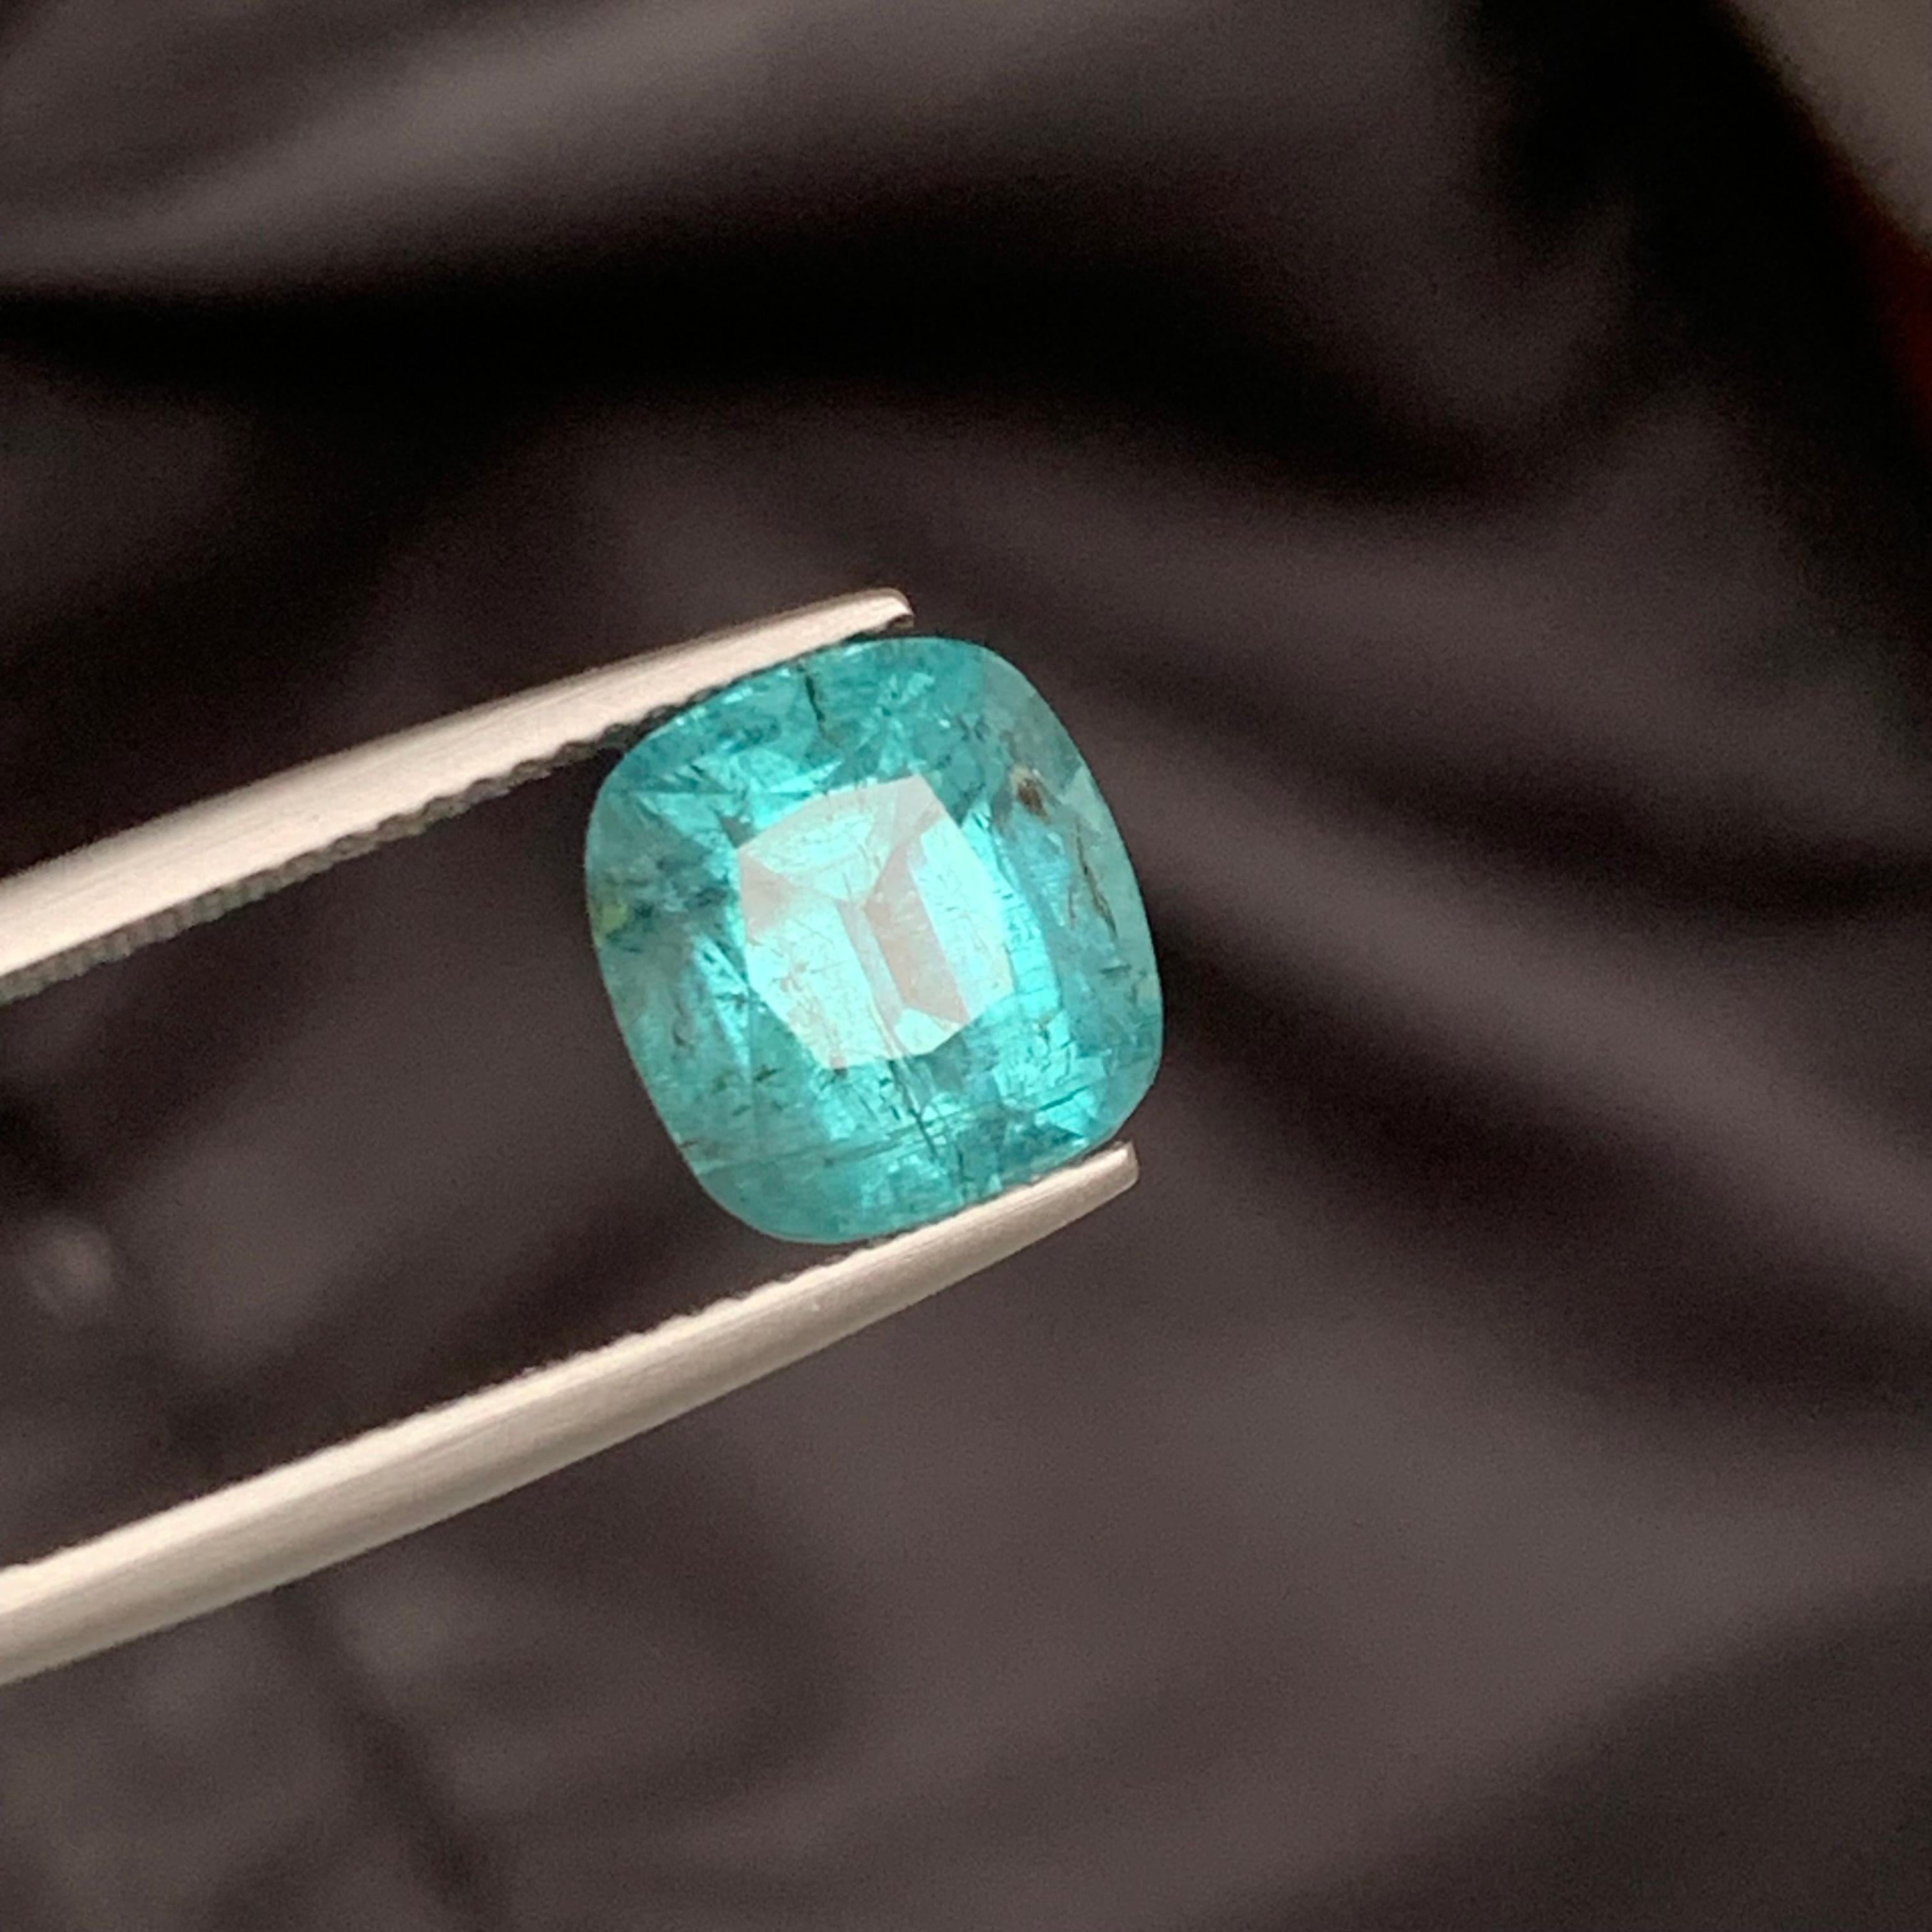 Rare Blue Natural Tourmaline Gemstone, 6.25 Ct Cushion Cut for Ring/Jewelry  For Sale 6